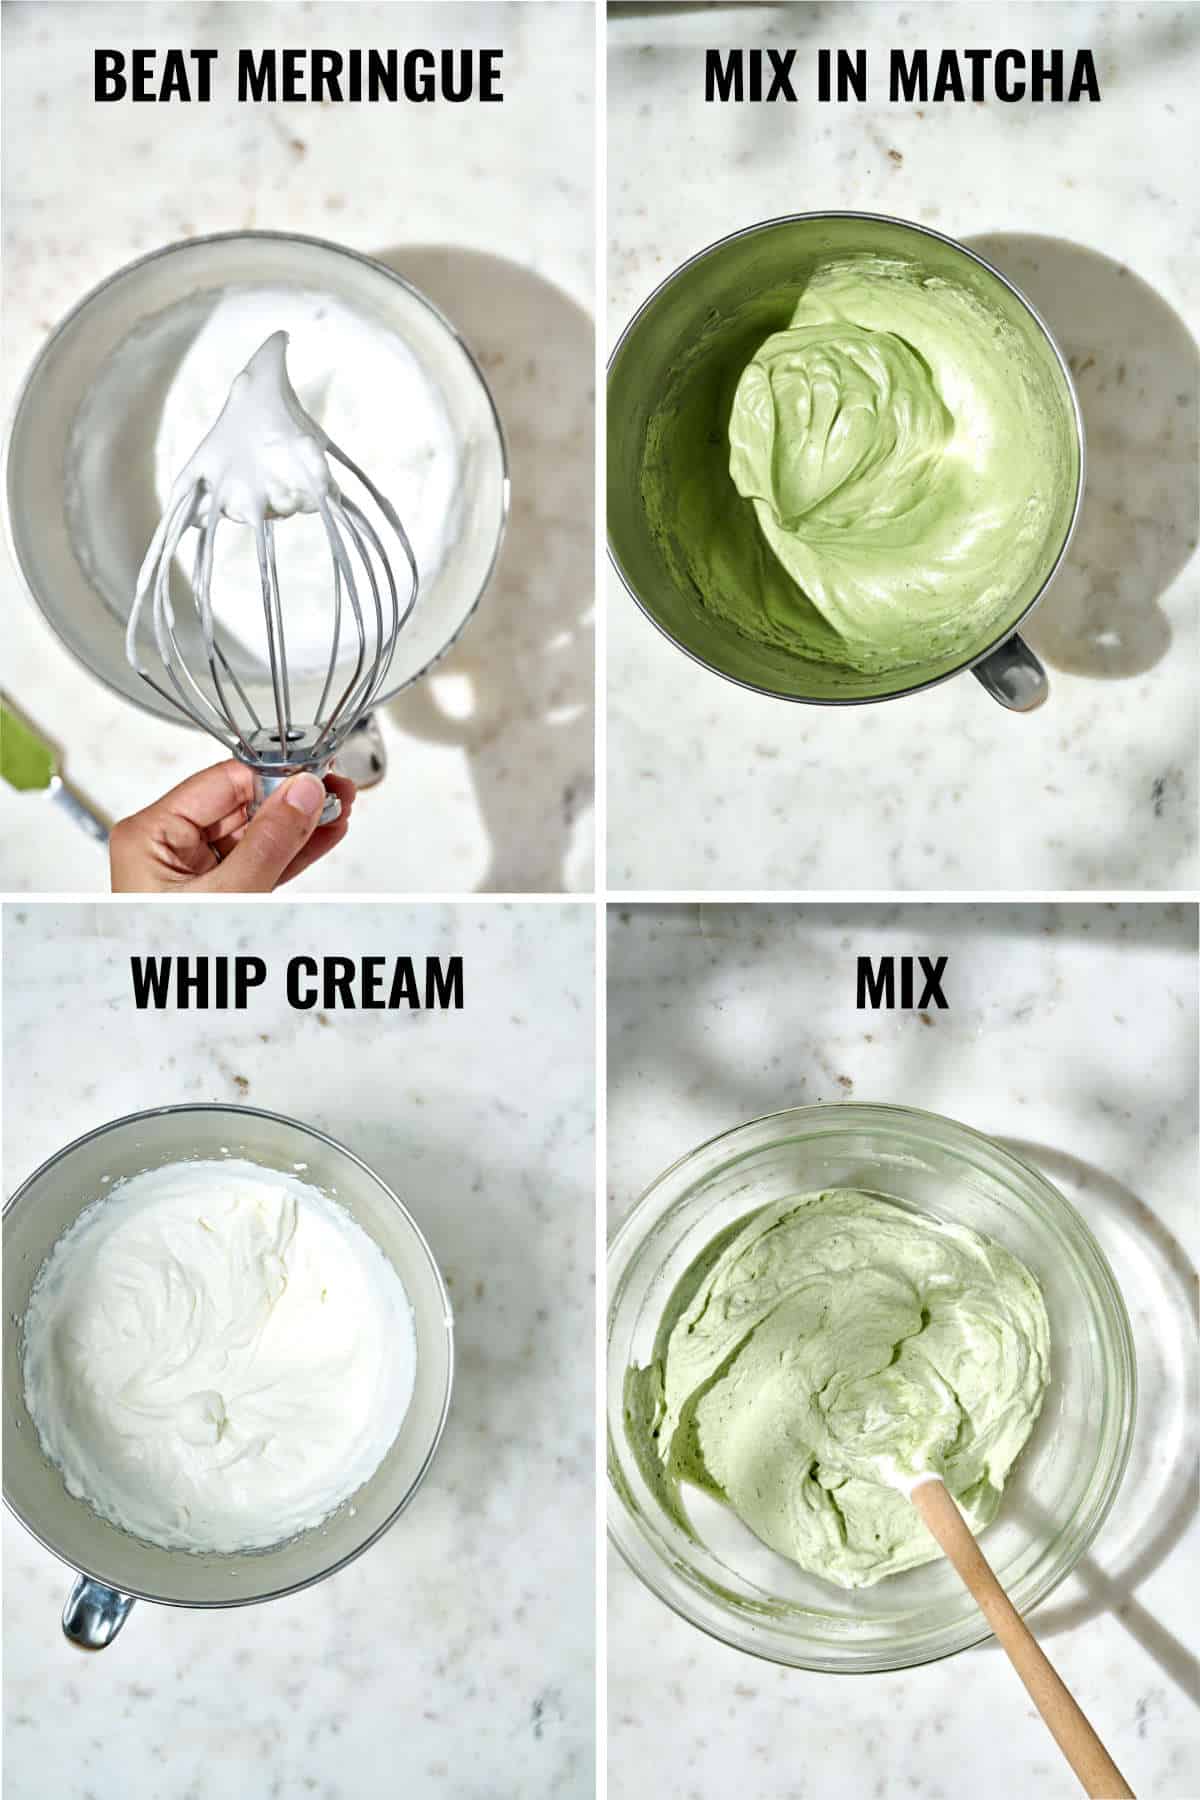 Consistencies of different components of matcha mousse.